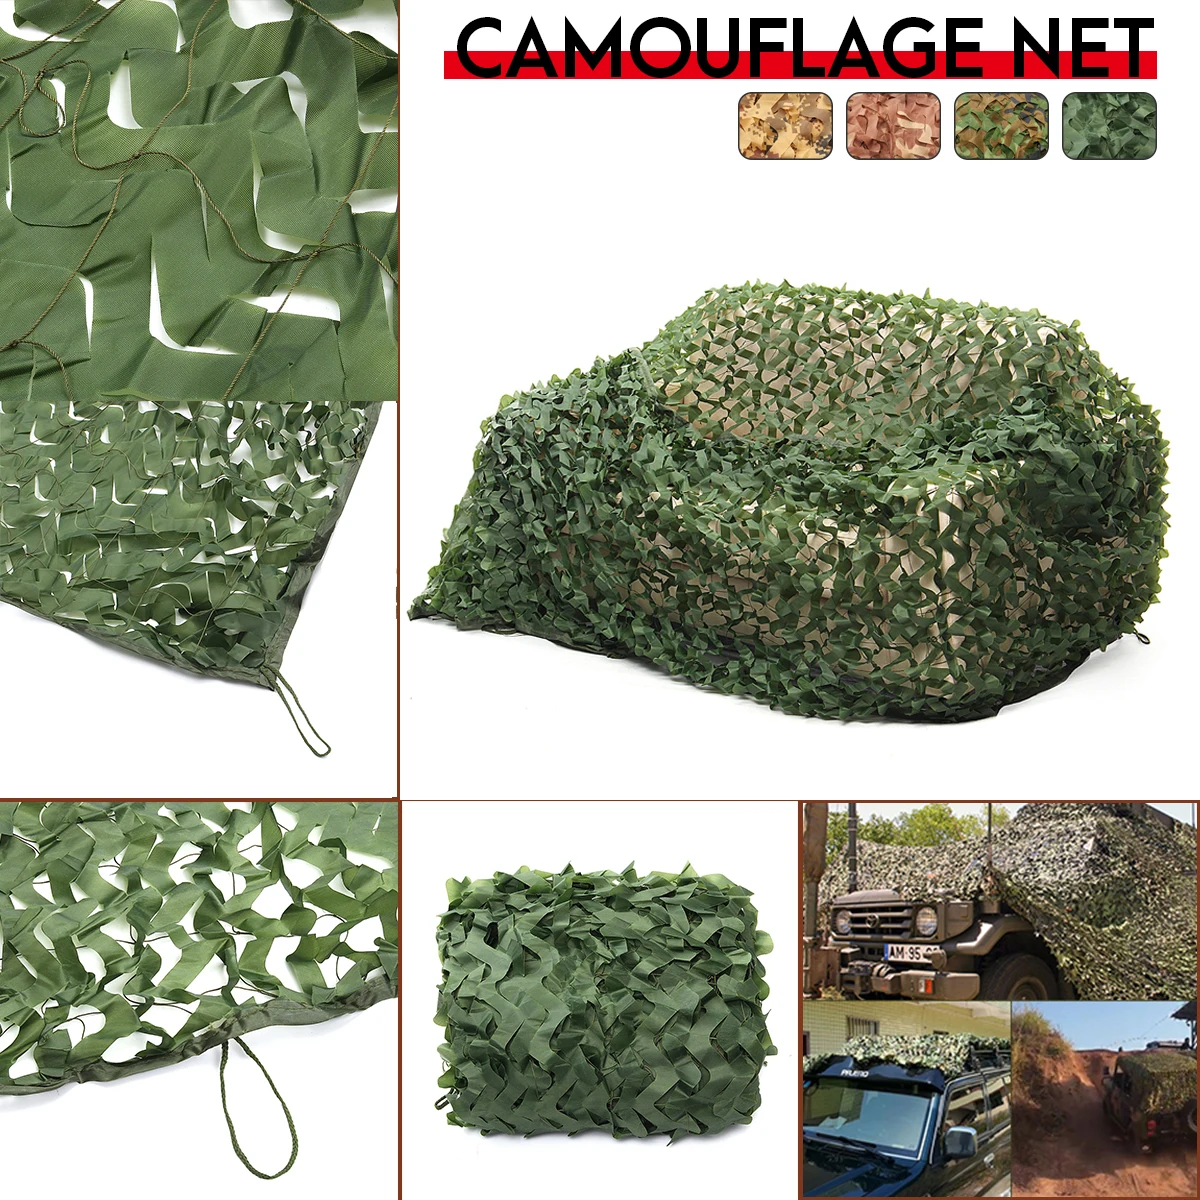 Oxford Fabric Camouflage Net Camo Netting Hunting/Shooting Hide Army 3 x 5M UK 